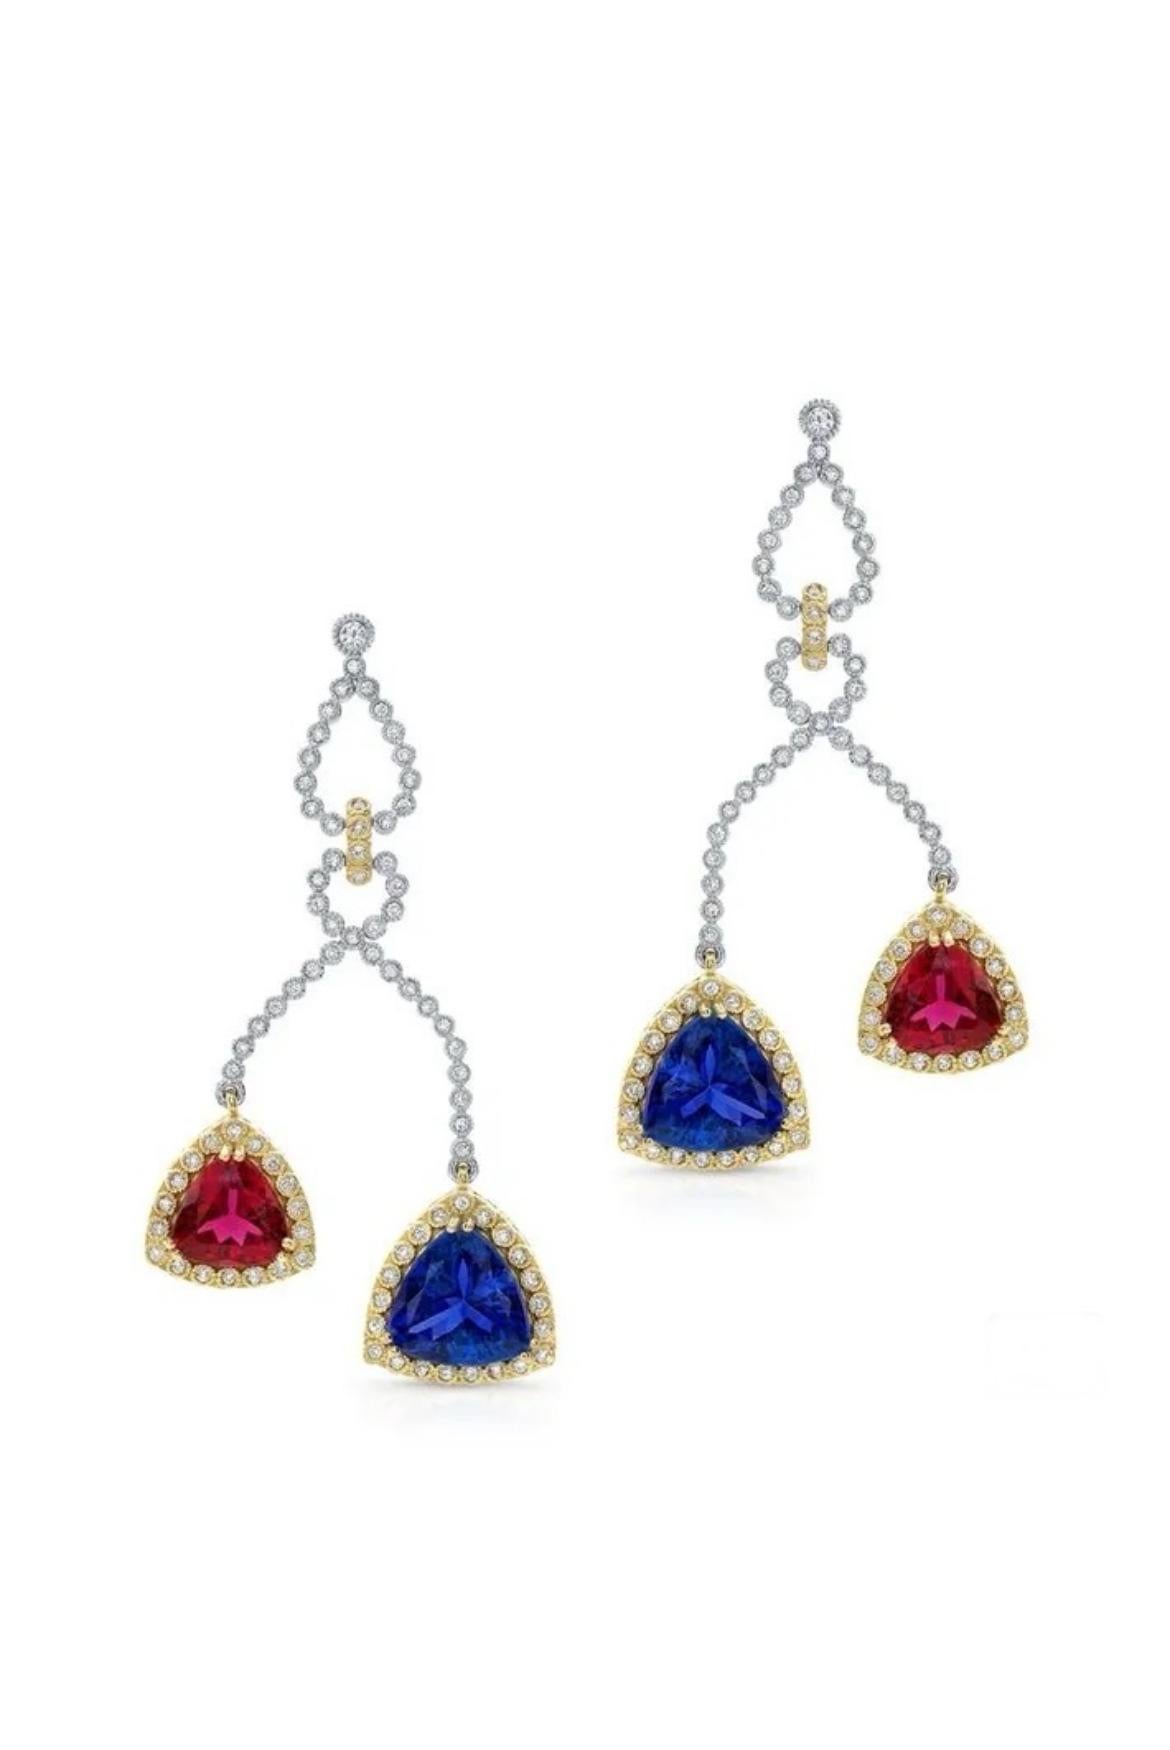 These glamorous earrings showcase 9.20 carats of Tanzanites and 4.50 carats of Rubellite Tourmalines beautifully complemented by 202 white twinkling diamonds totaling 1.30 carats in 18K yellow gold. 